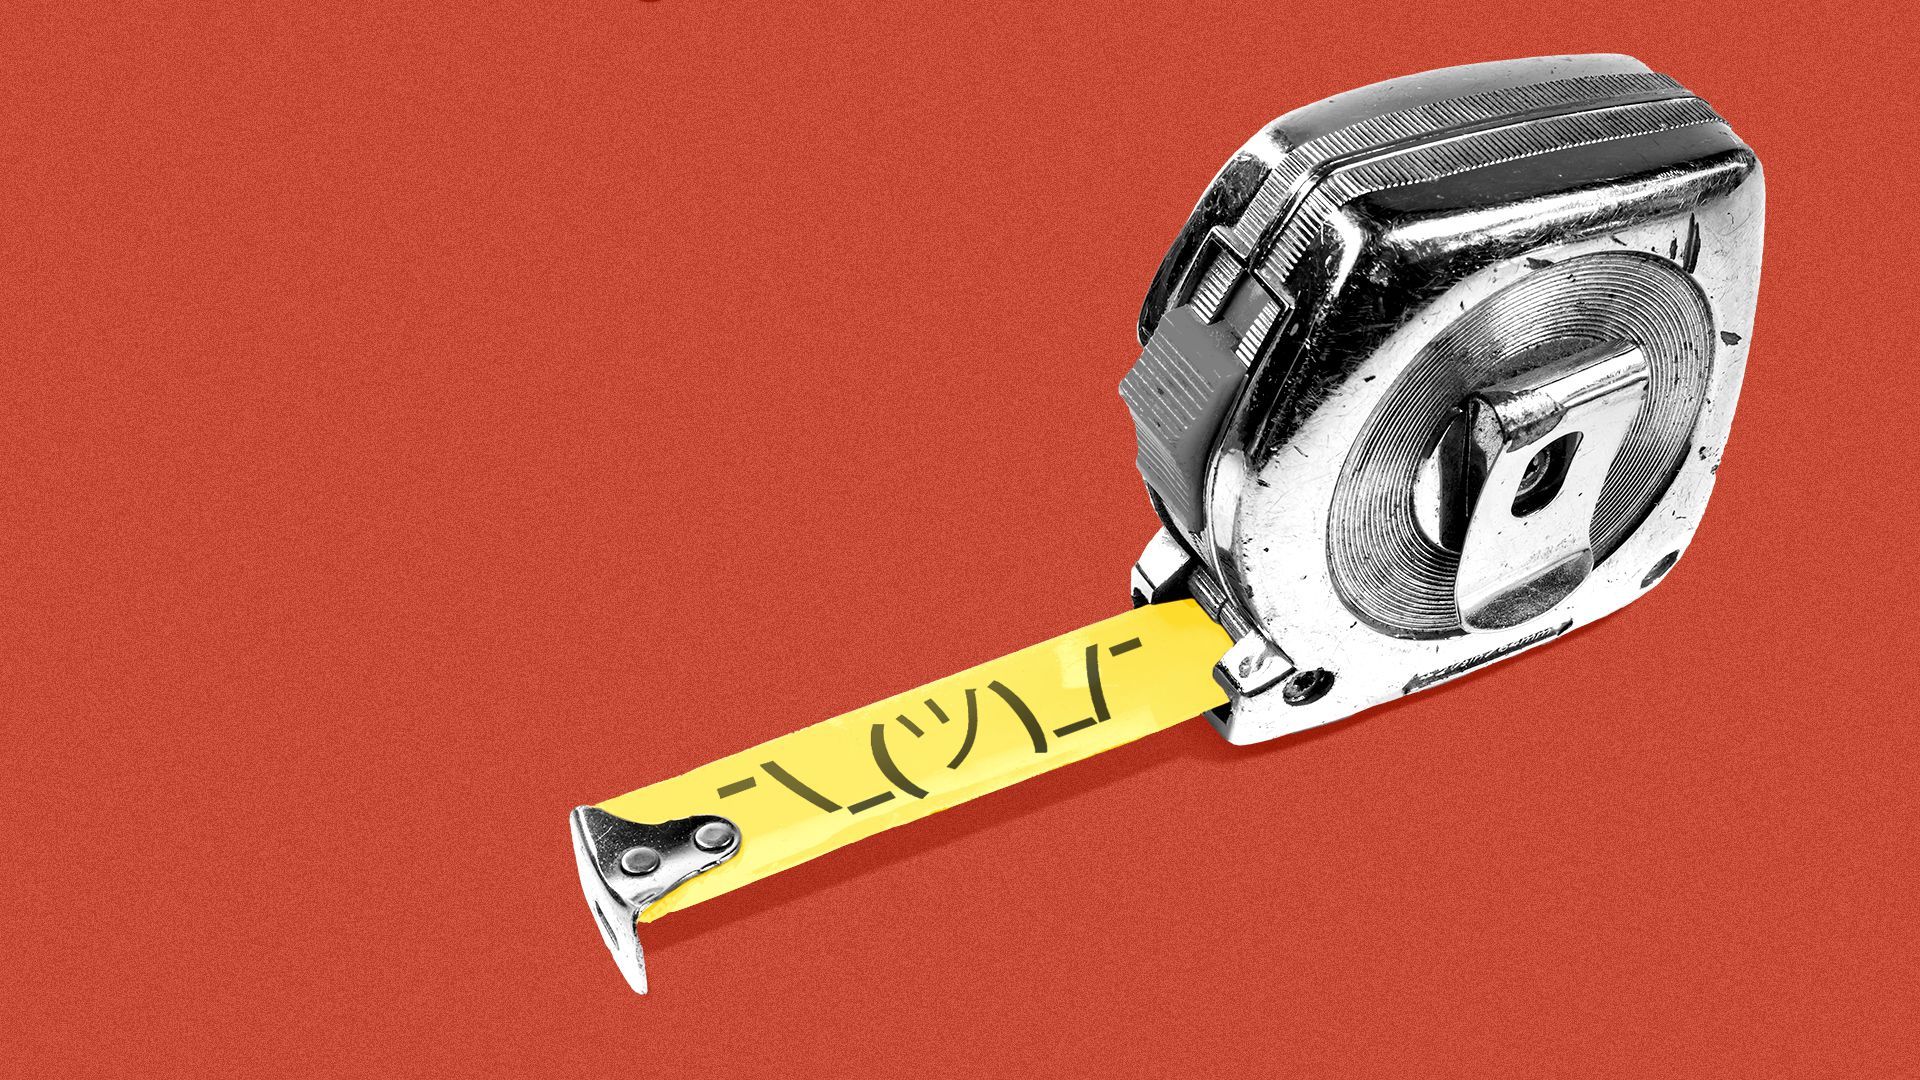 Illustration of a tape measure with a shrug emoji on the tape instead of inch marks.